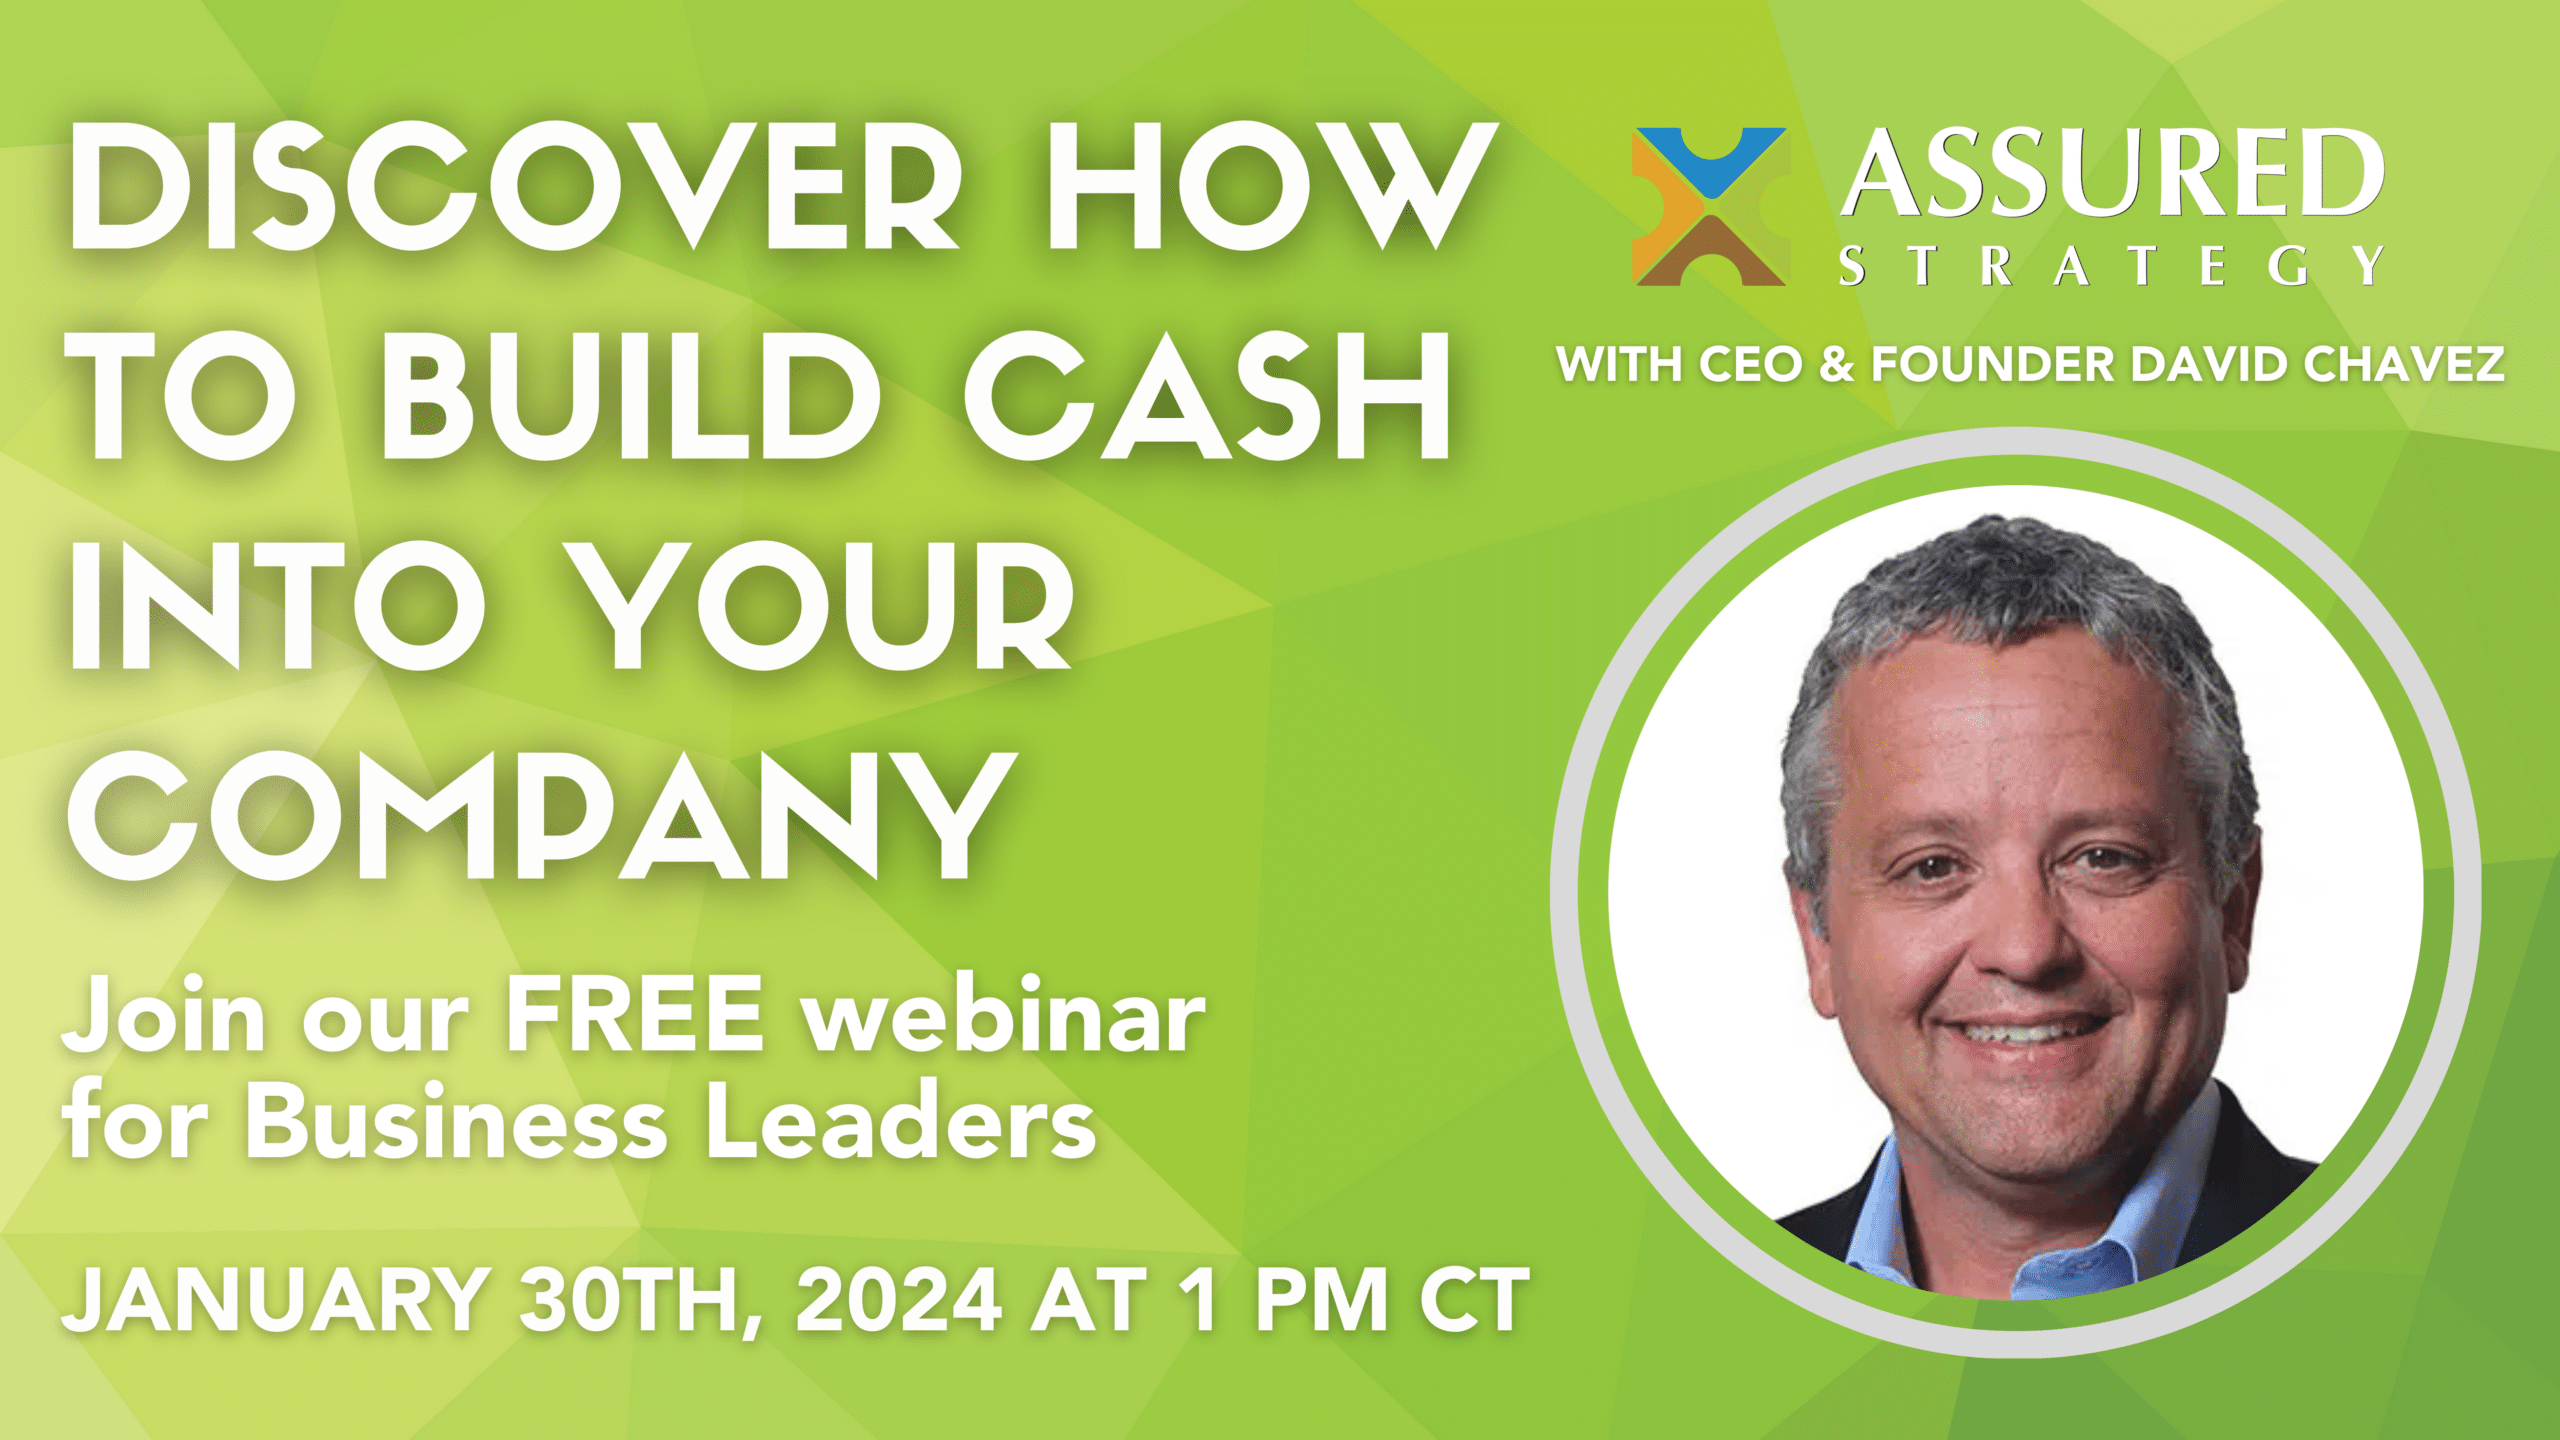 Free Webinar: Why Your Employees Think You Make Wheelbarrows of Money: A Look Into Building Cash in Your Company